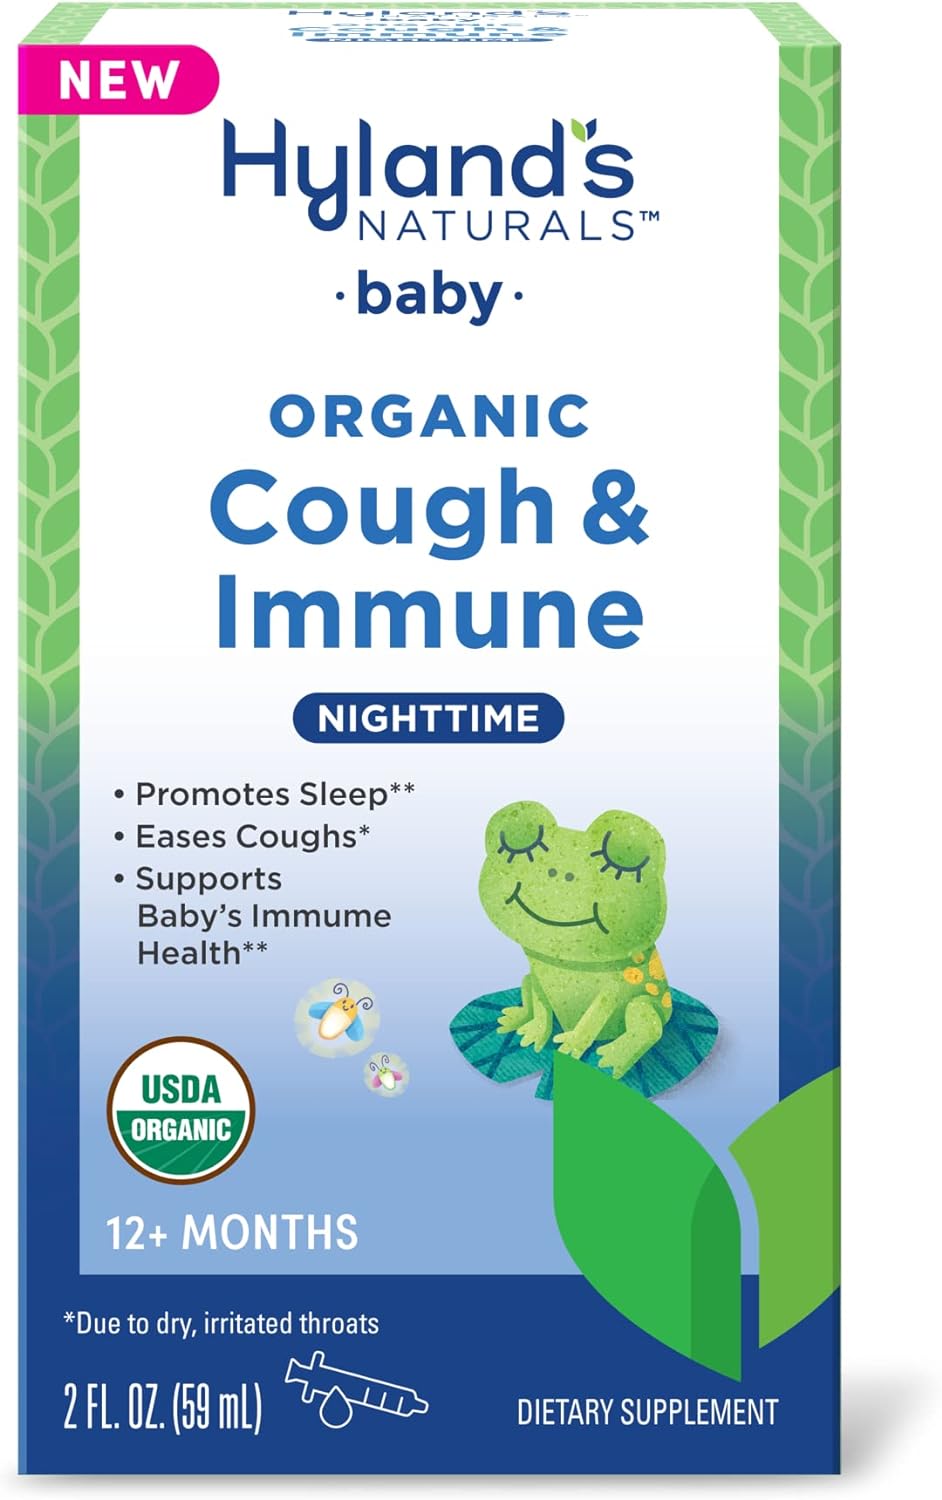 Hyland's Naturals Baby Organic Cough & Immune with Agave, Elderberry & Pomegranate - Soothes Cough and Cold, & Supports Immunity - Nighttime - 2 Fl. Oz